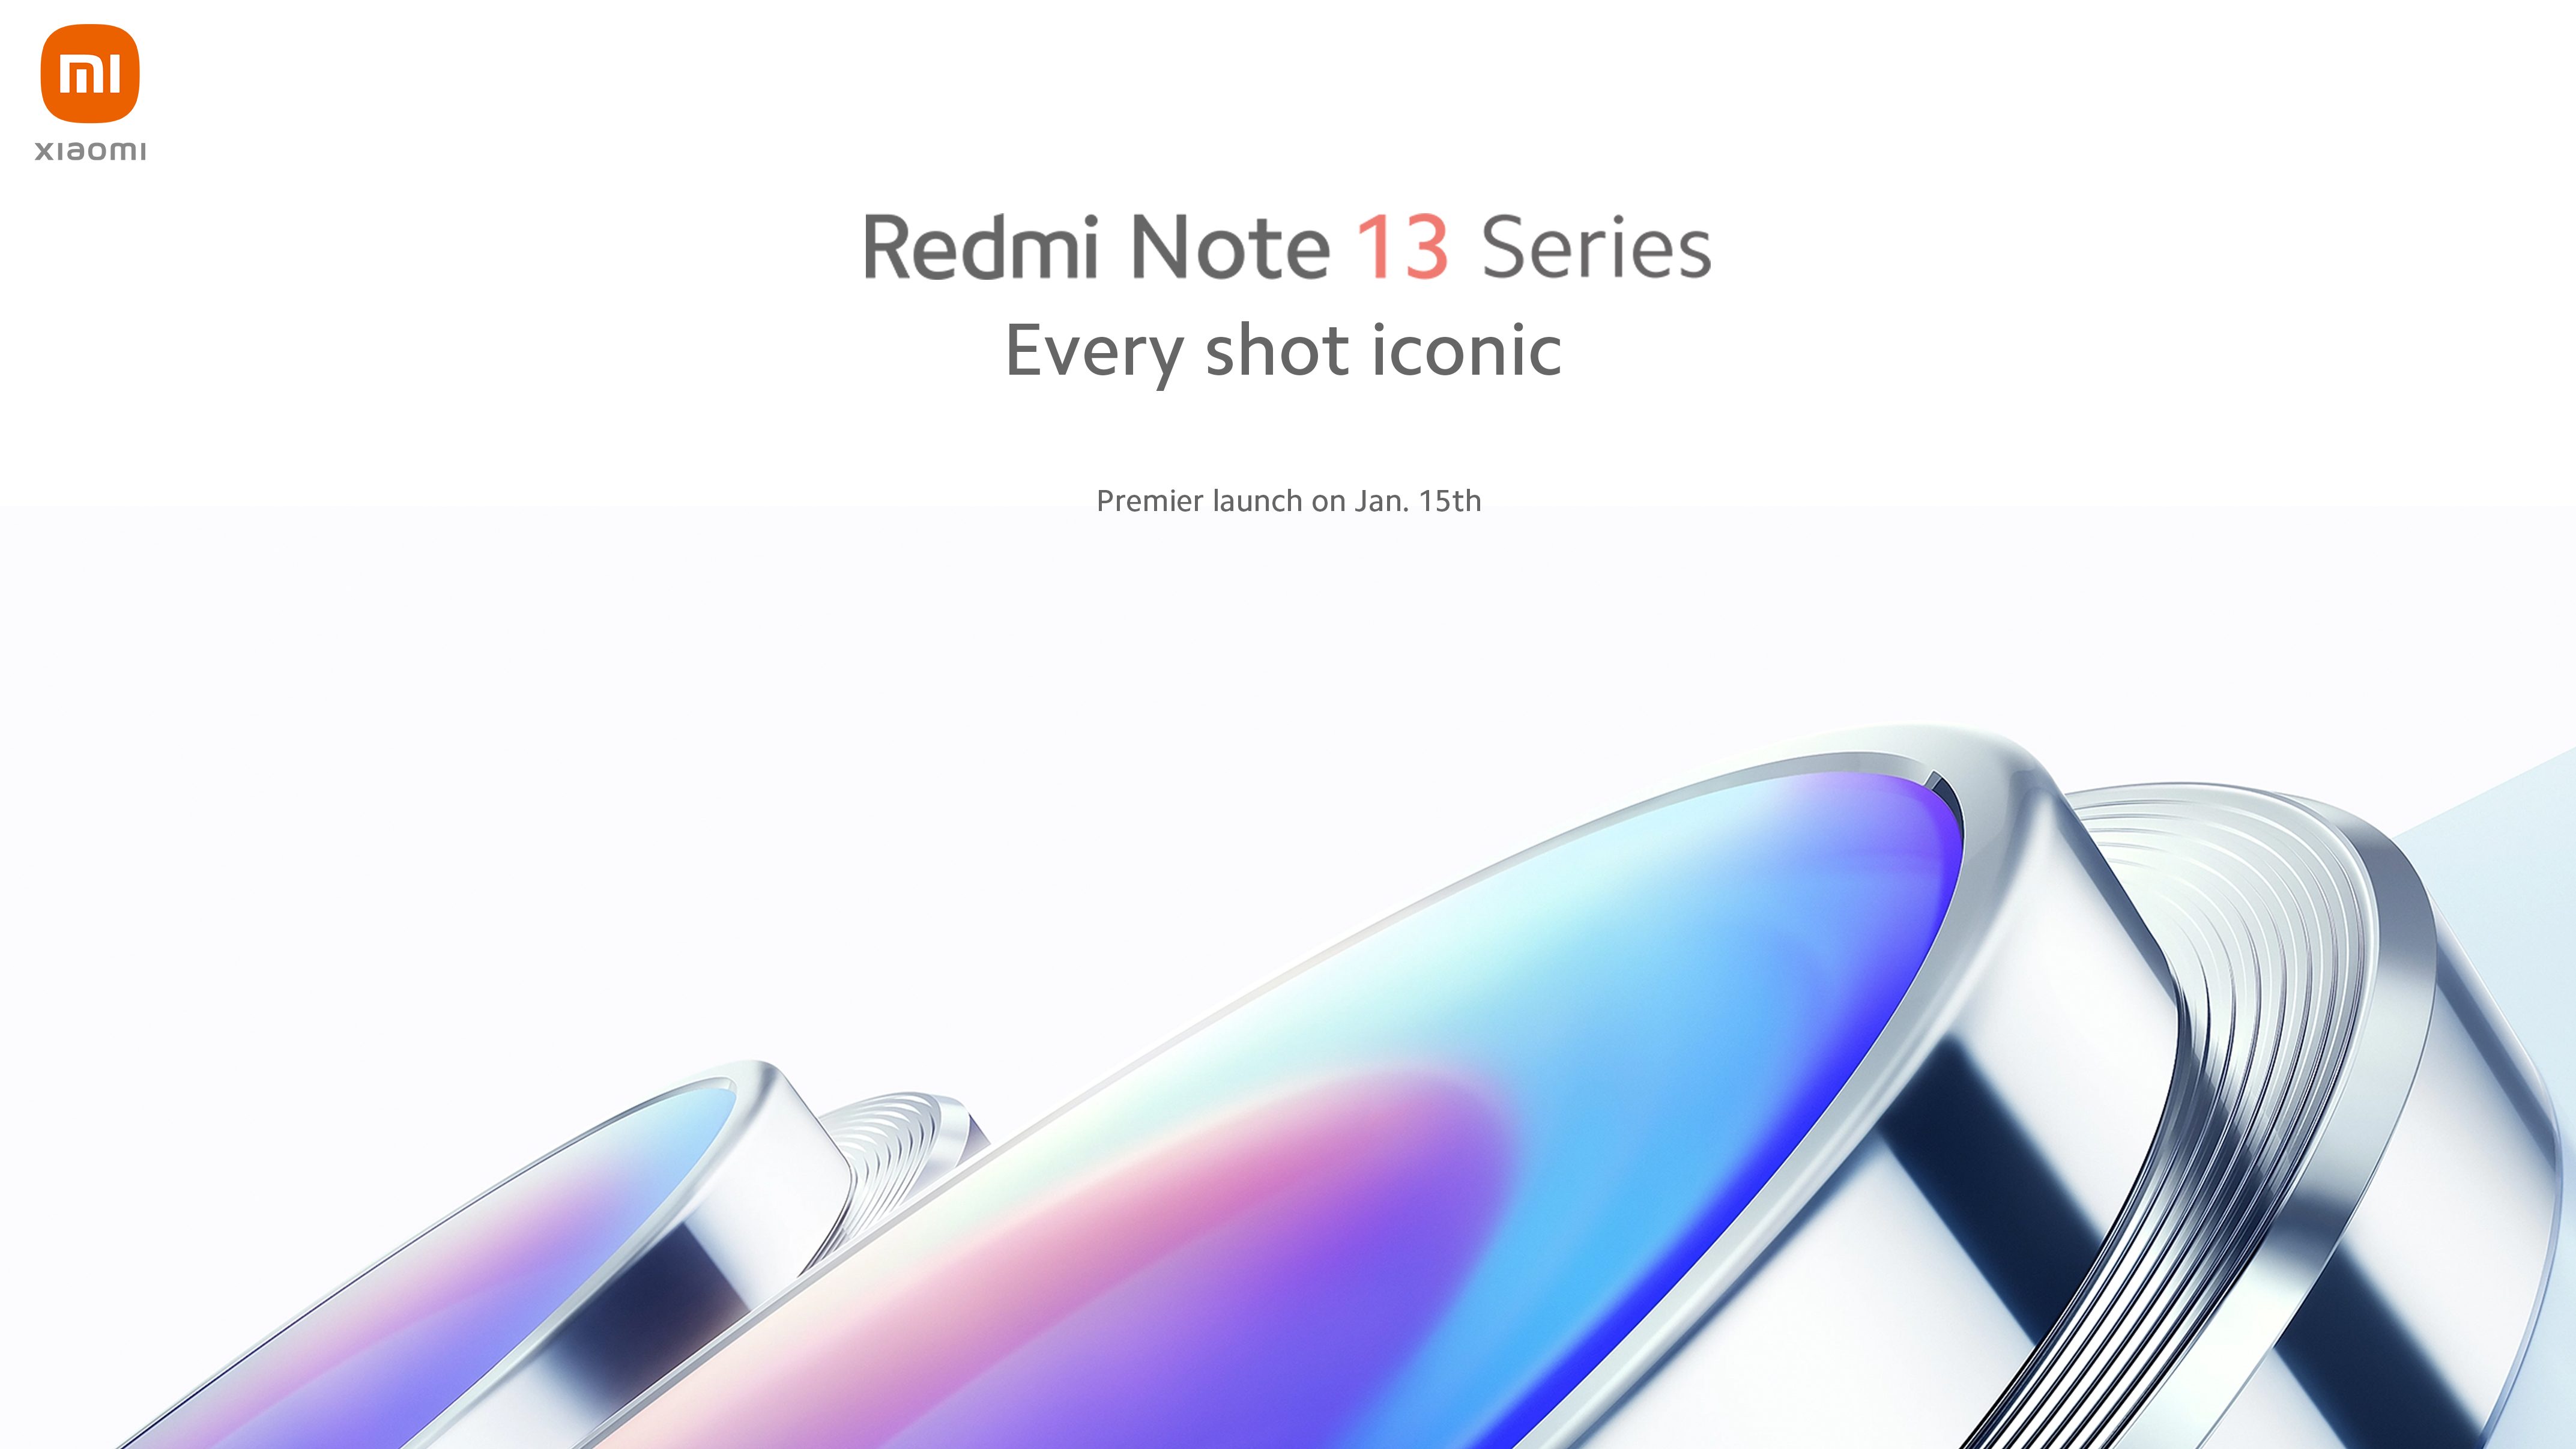 Redmi Note 13 Pro+ tipped to get these features.. Check details